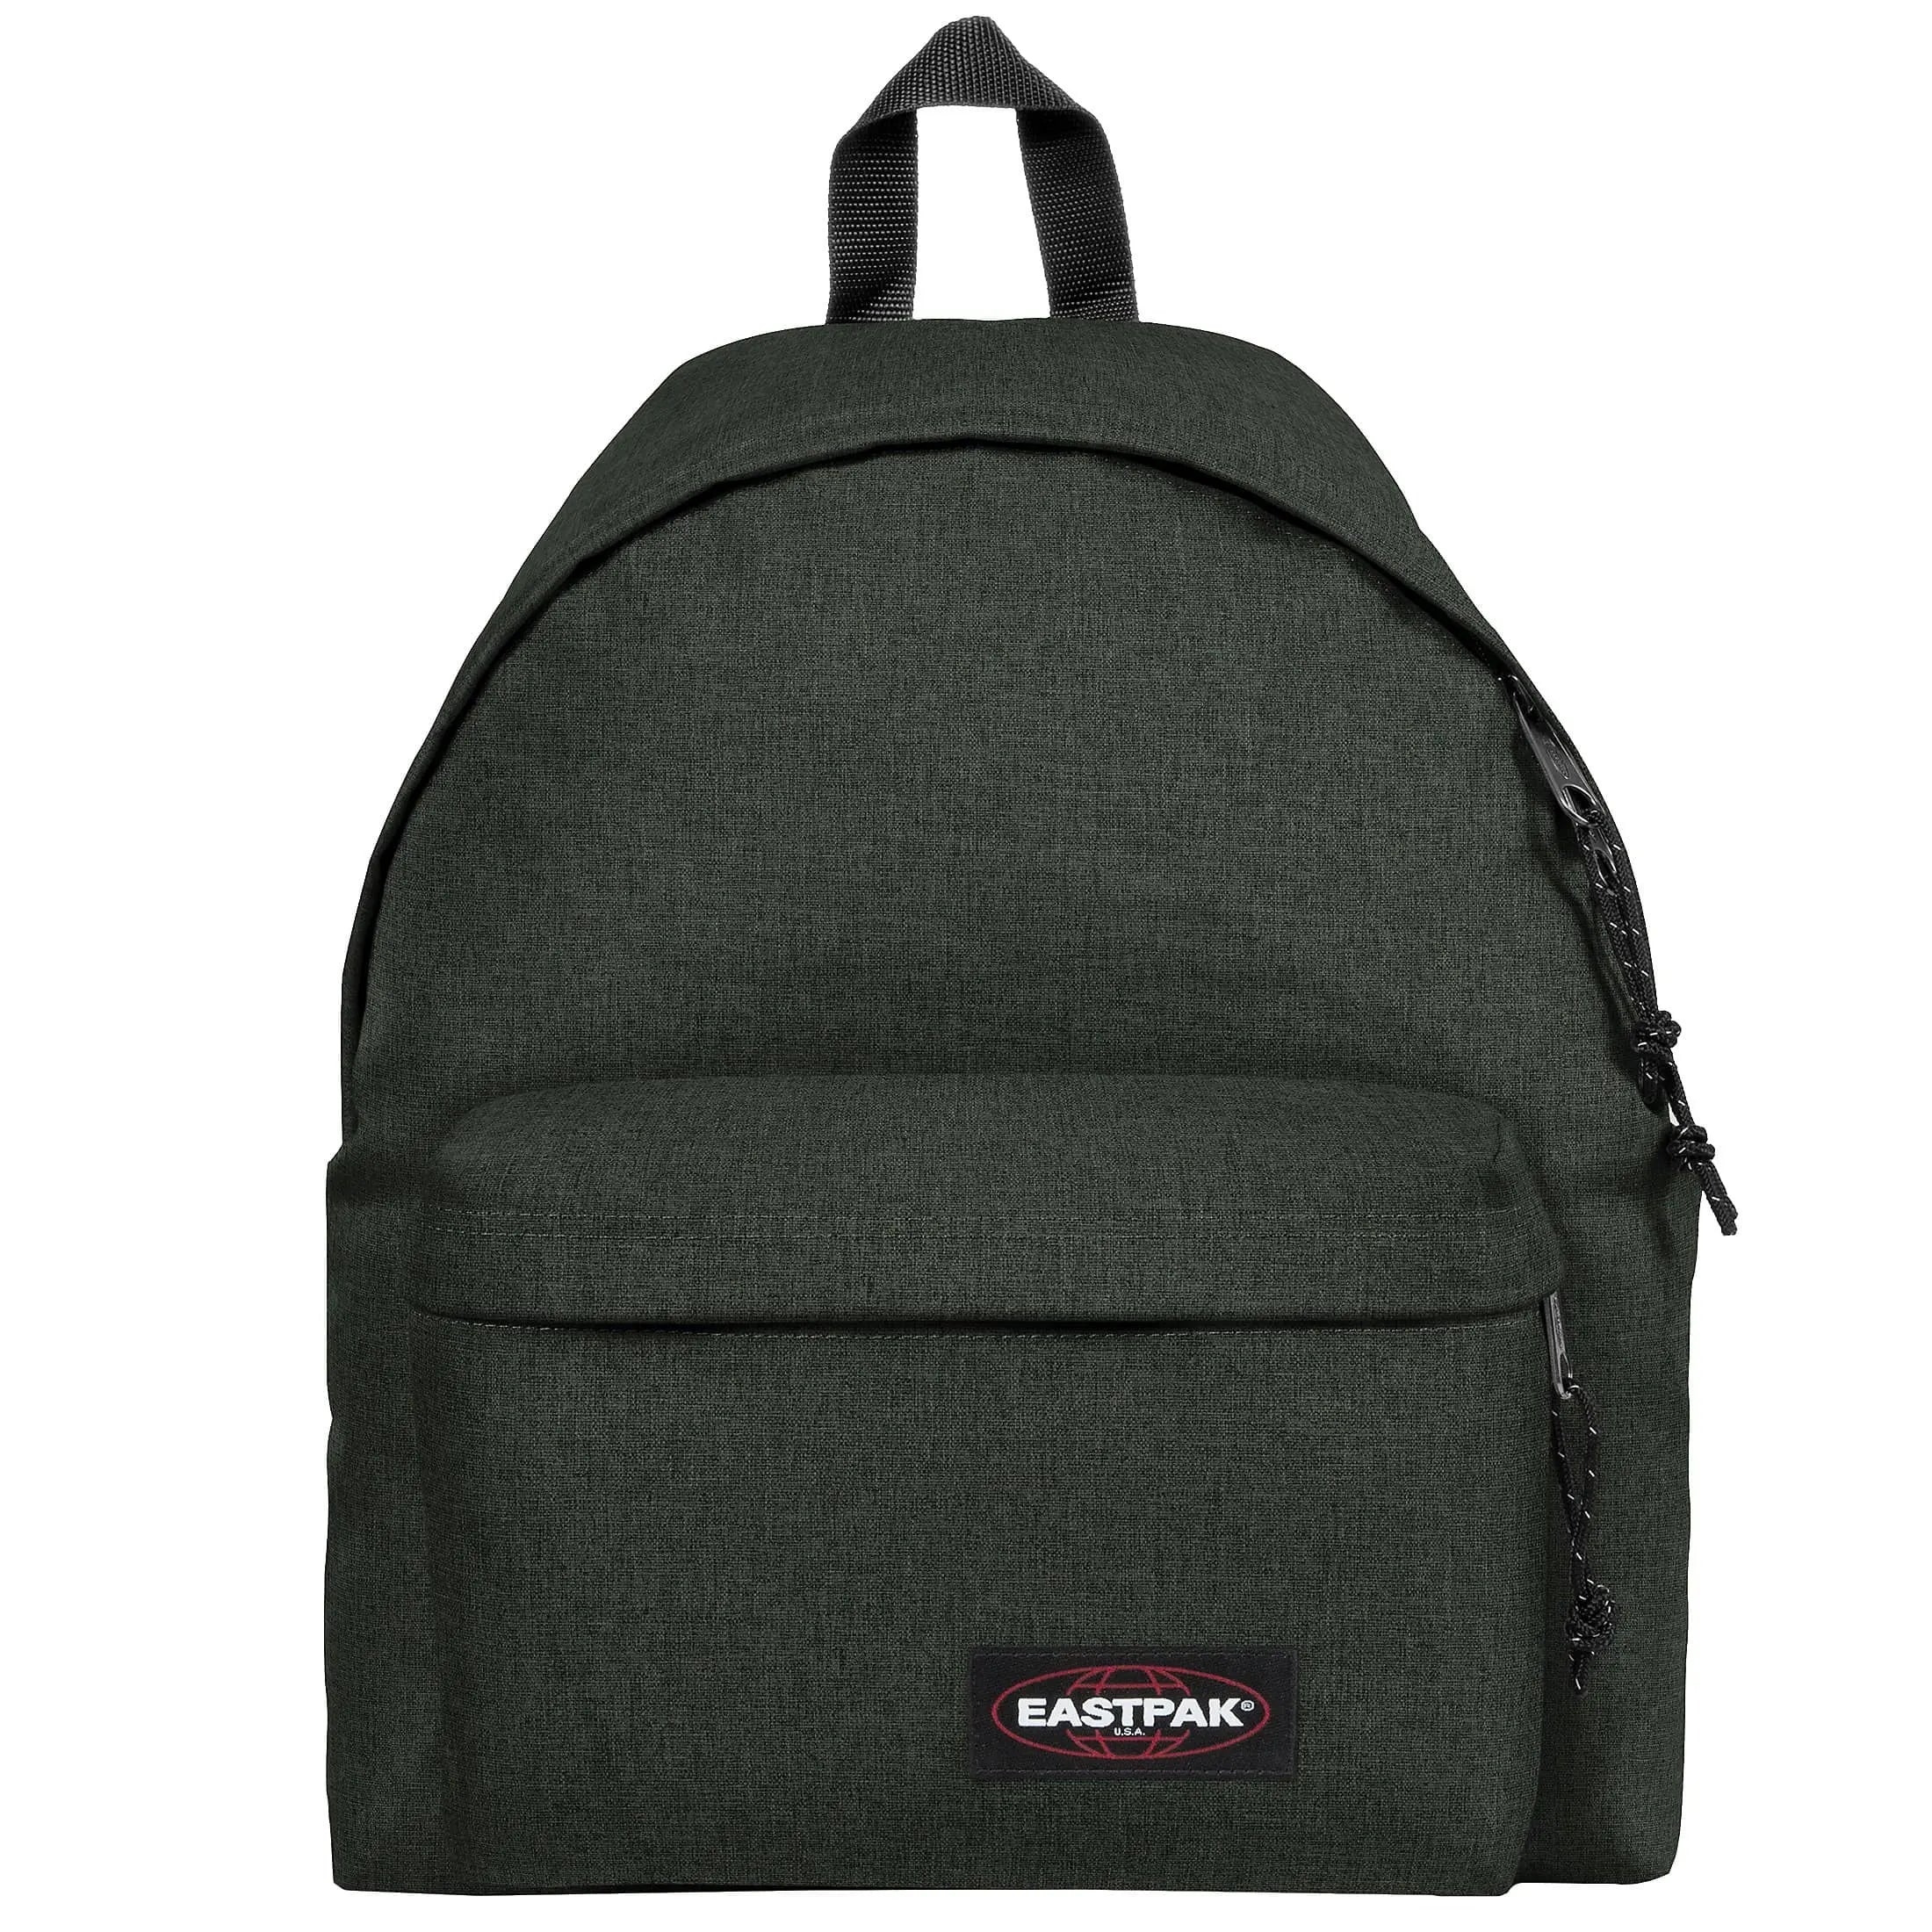 Eastpak Authentic Padded Pak'r leisure backpack 41 cm - crafty moss